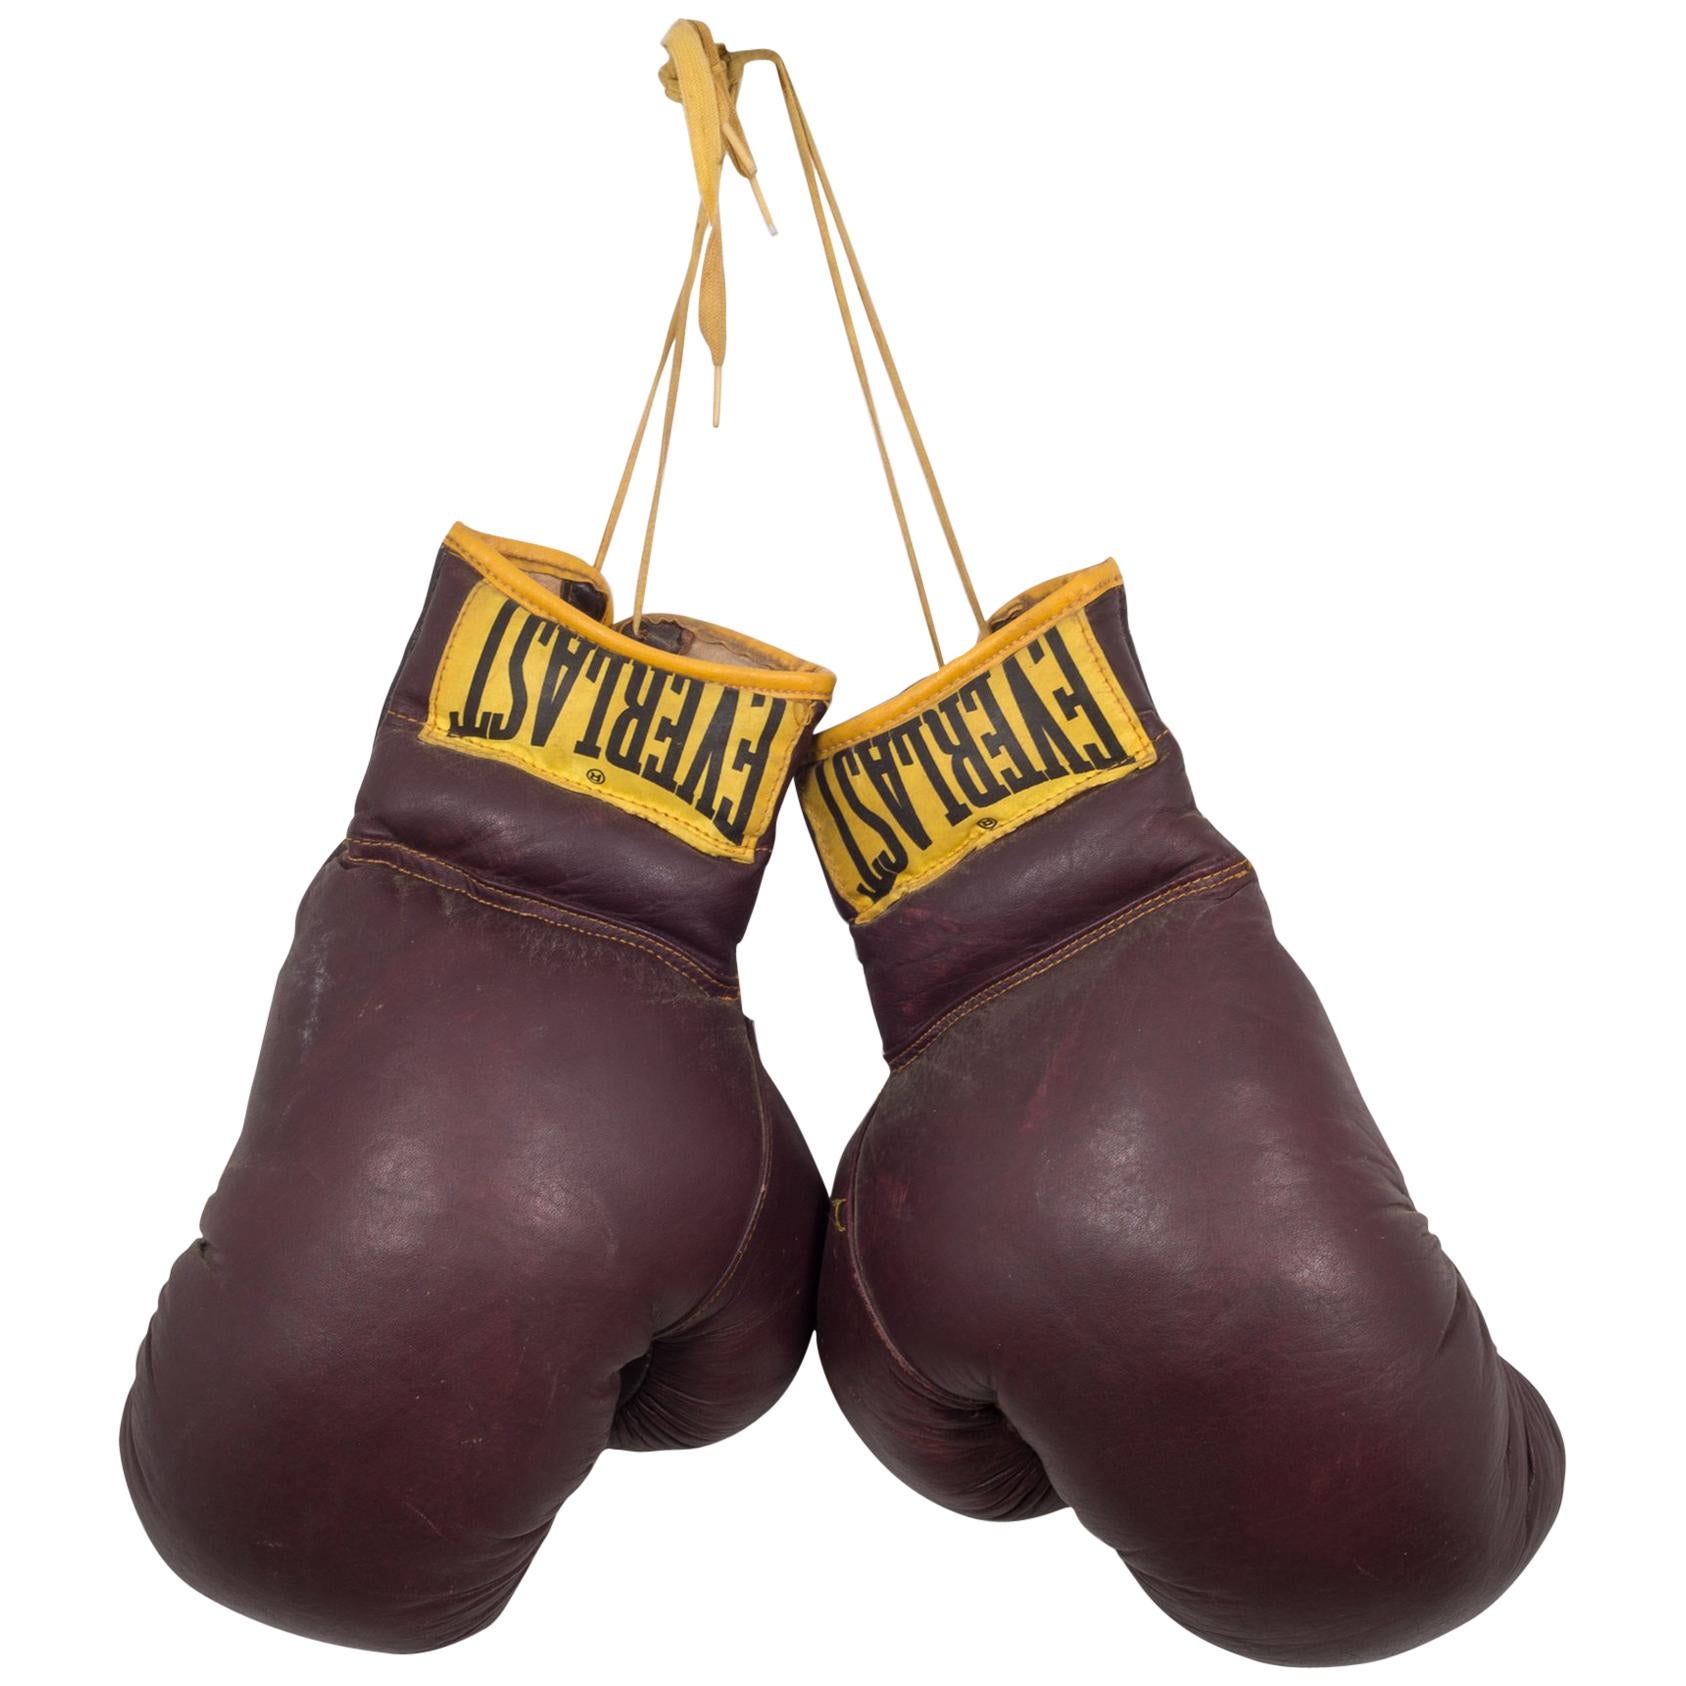 Vintage Leather Everlast Boxing Gloves, circa 1960s at 1stDibs old everlast boxing gloves, everlast vintage boxing gloves, 1960s boxing gloves